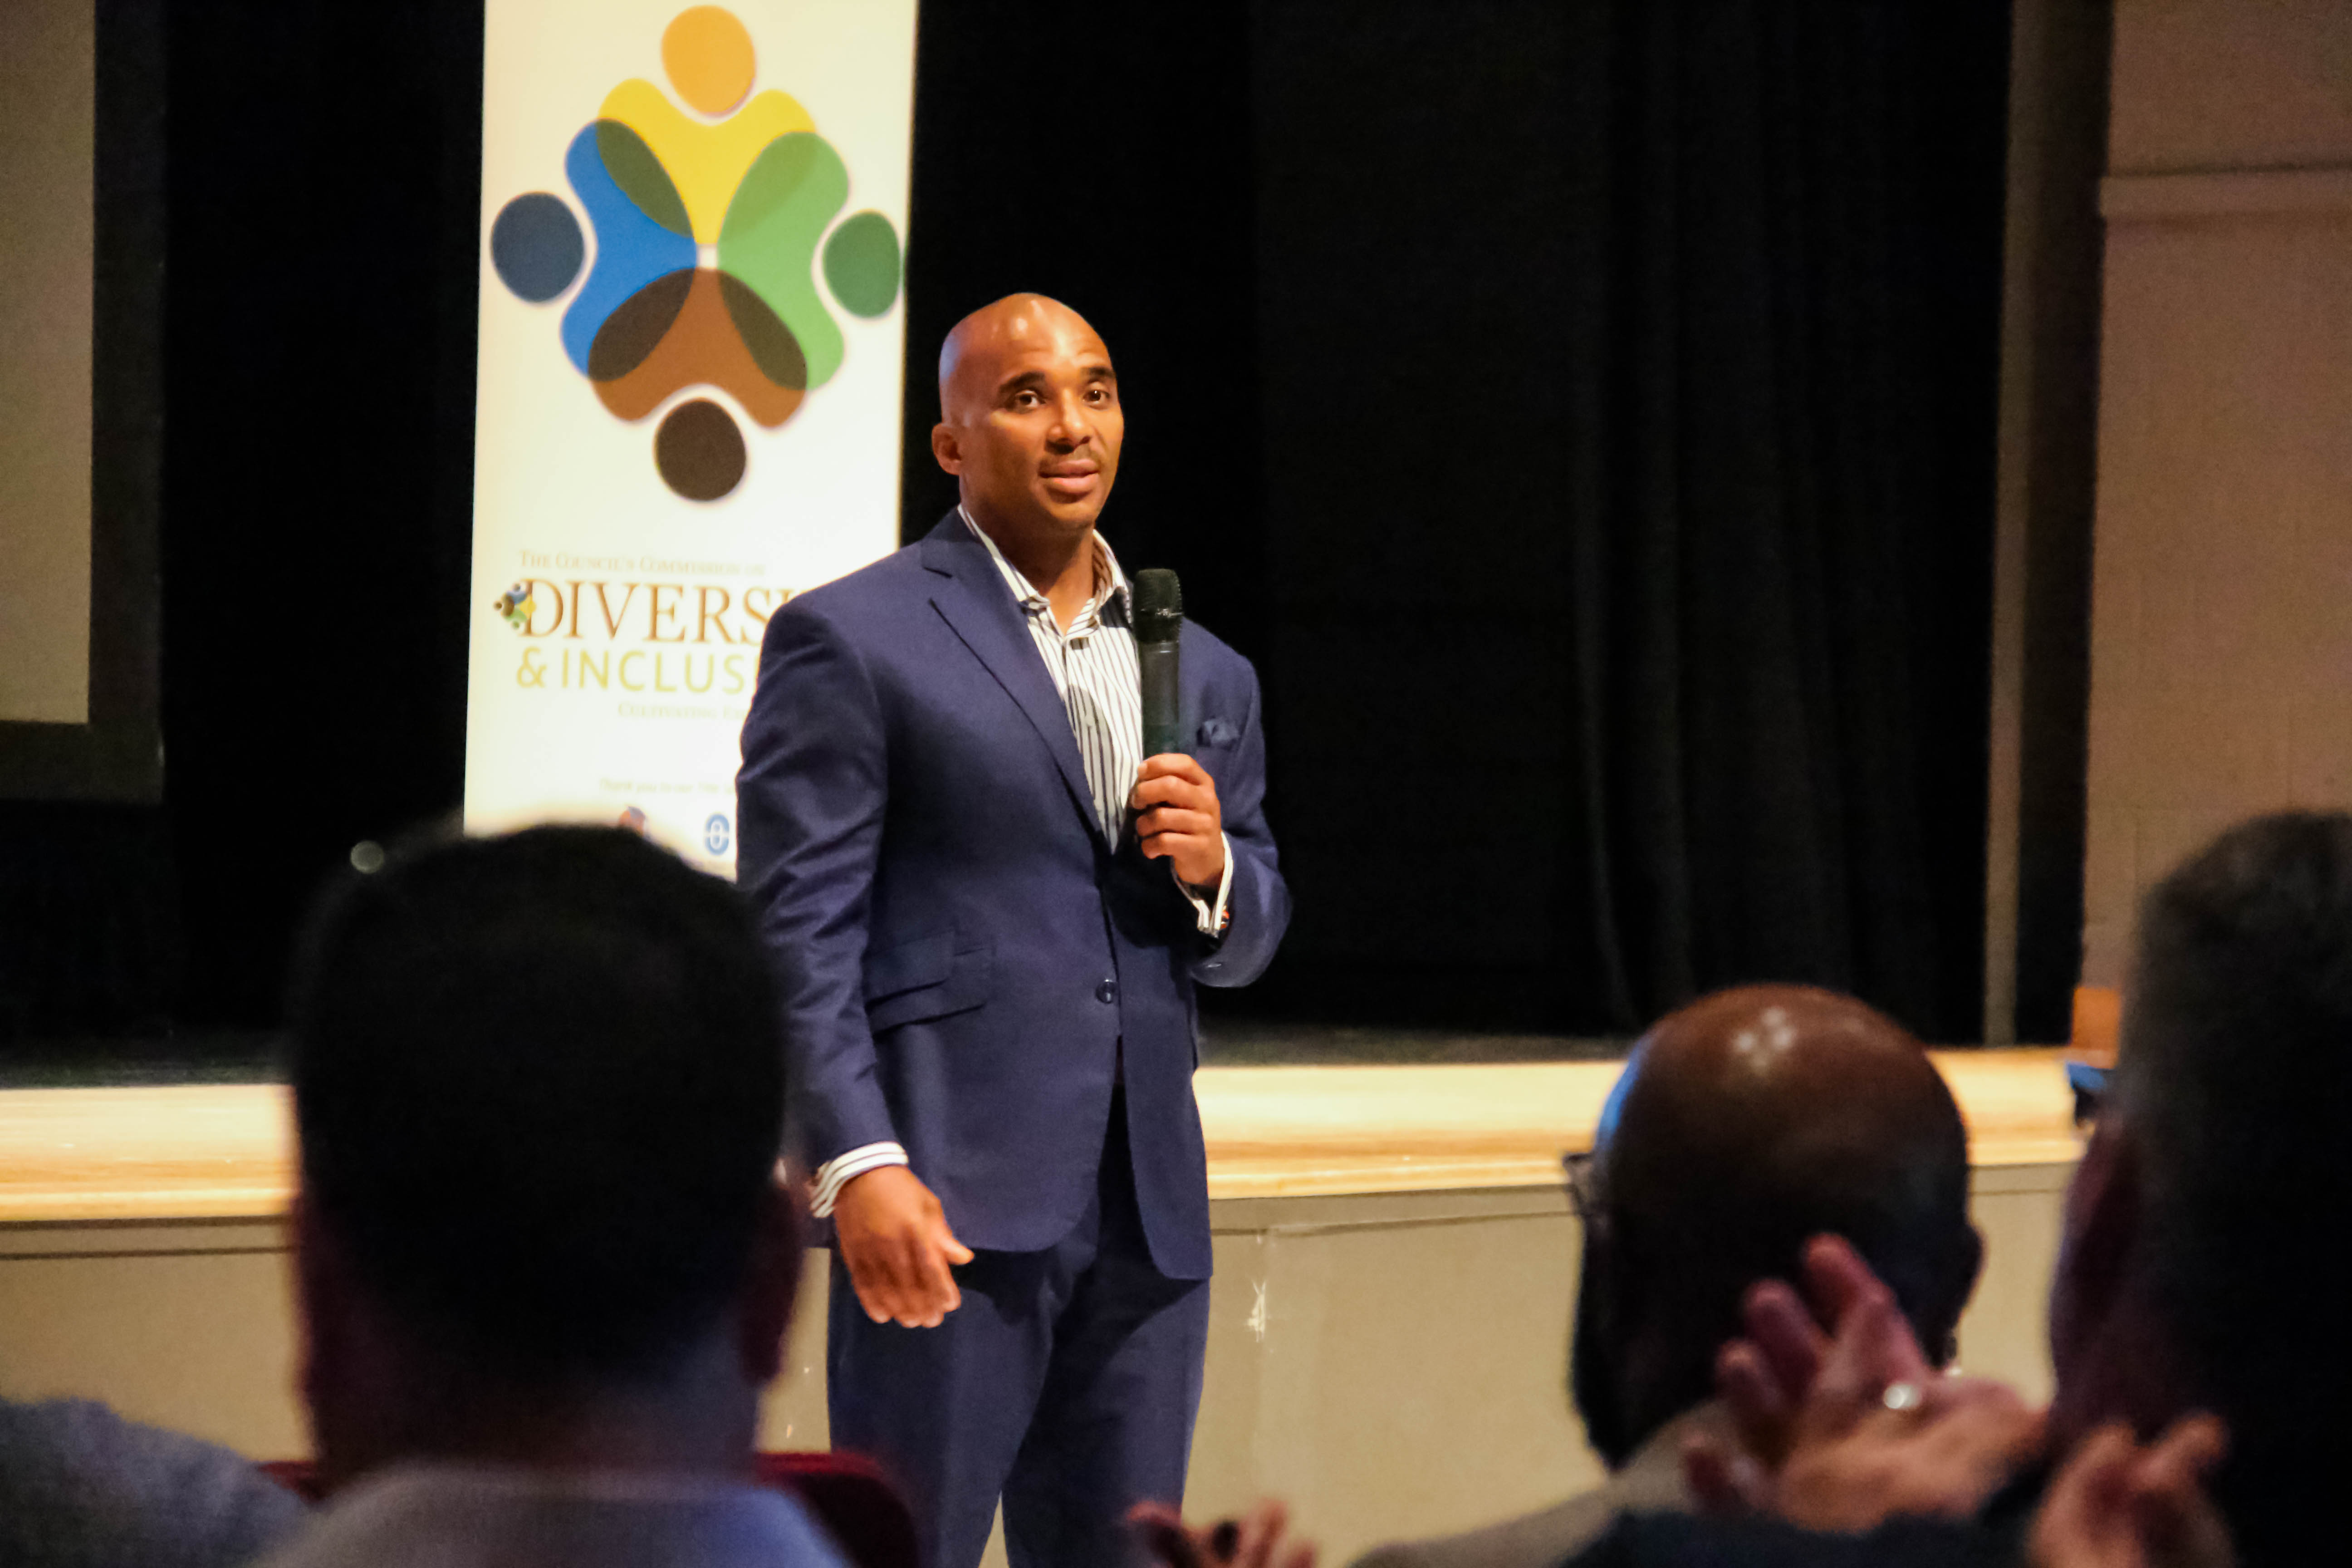 Dr. Brown Speaking at the 2019 Diversity Symposium if Thought Leaders